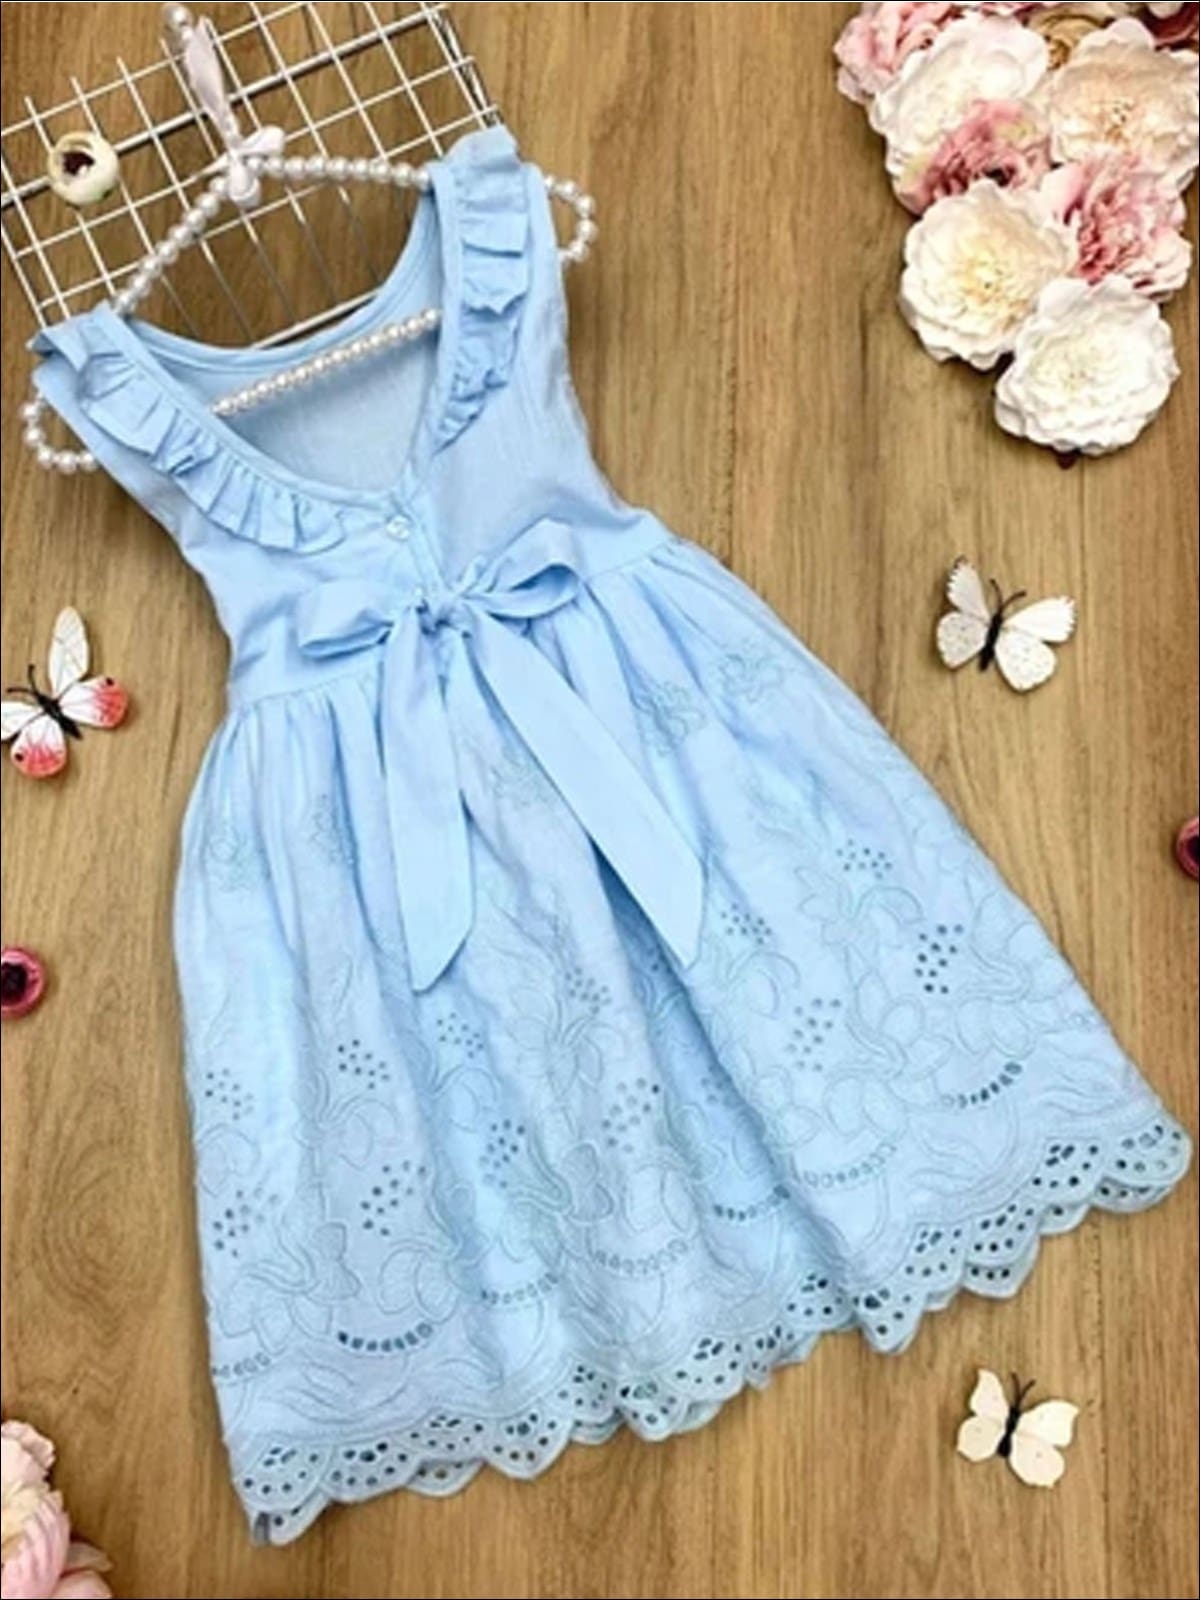 Little Girls Summer Dresses | Embroidered Lace Dress - Mia Belle Girls